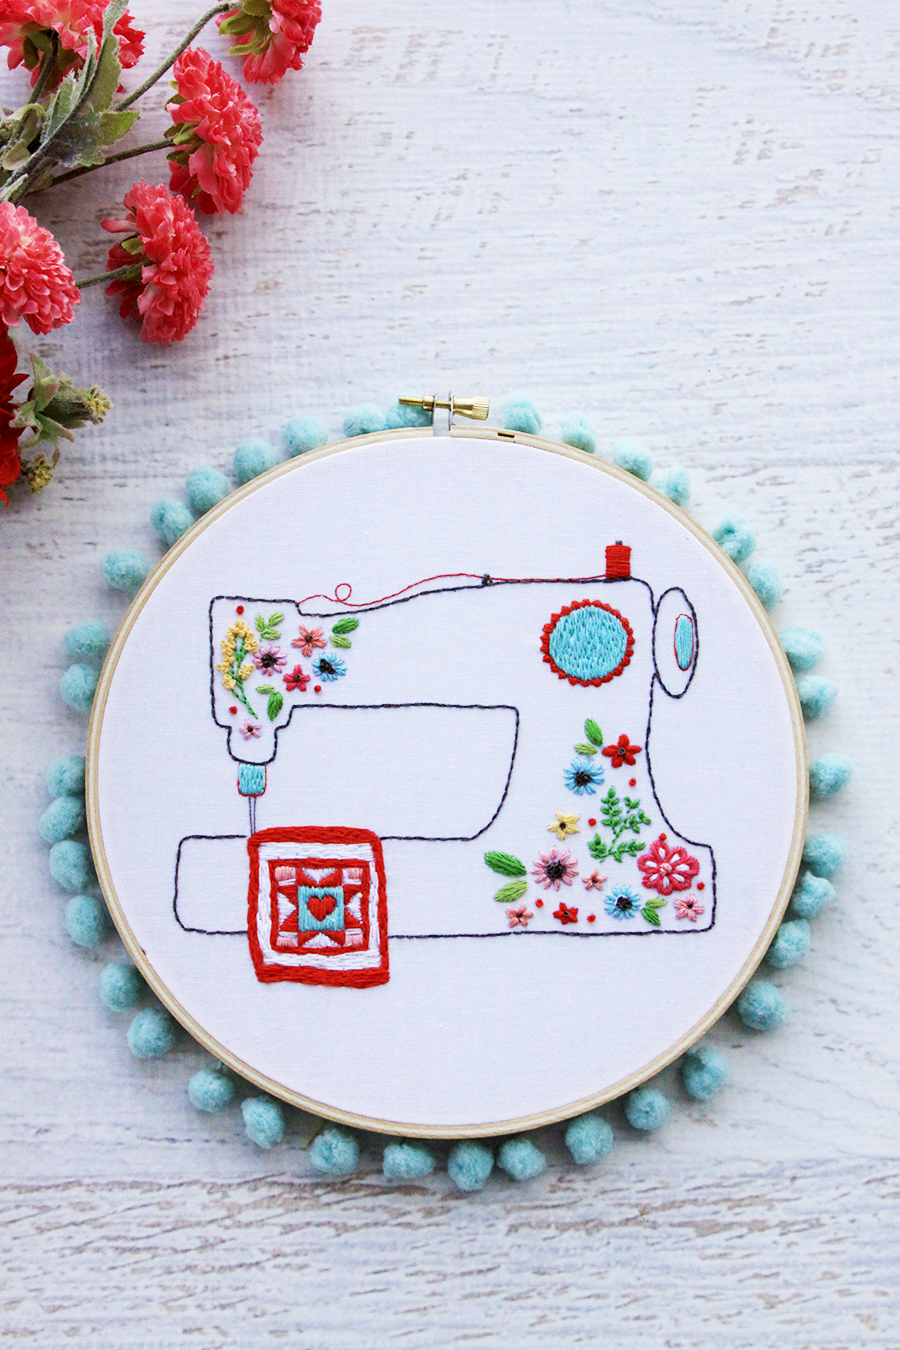 Sewing Machine Embroidery Patterns Floral Sewing Machine Pattern And Needle Minder